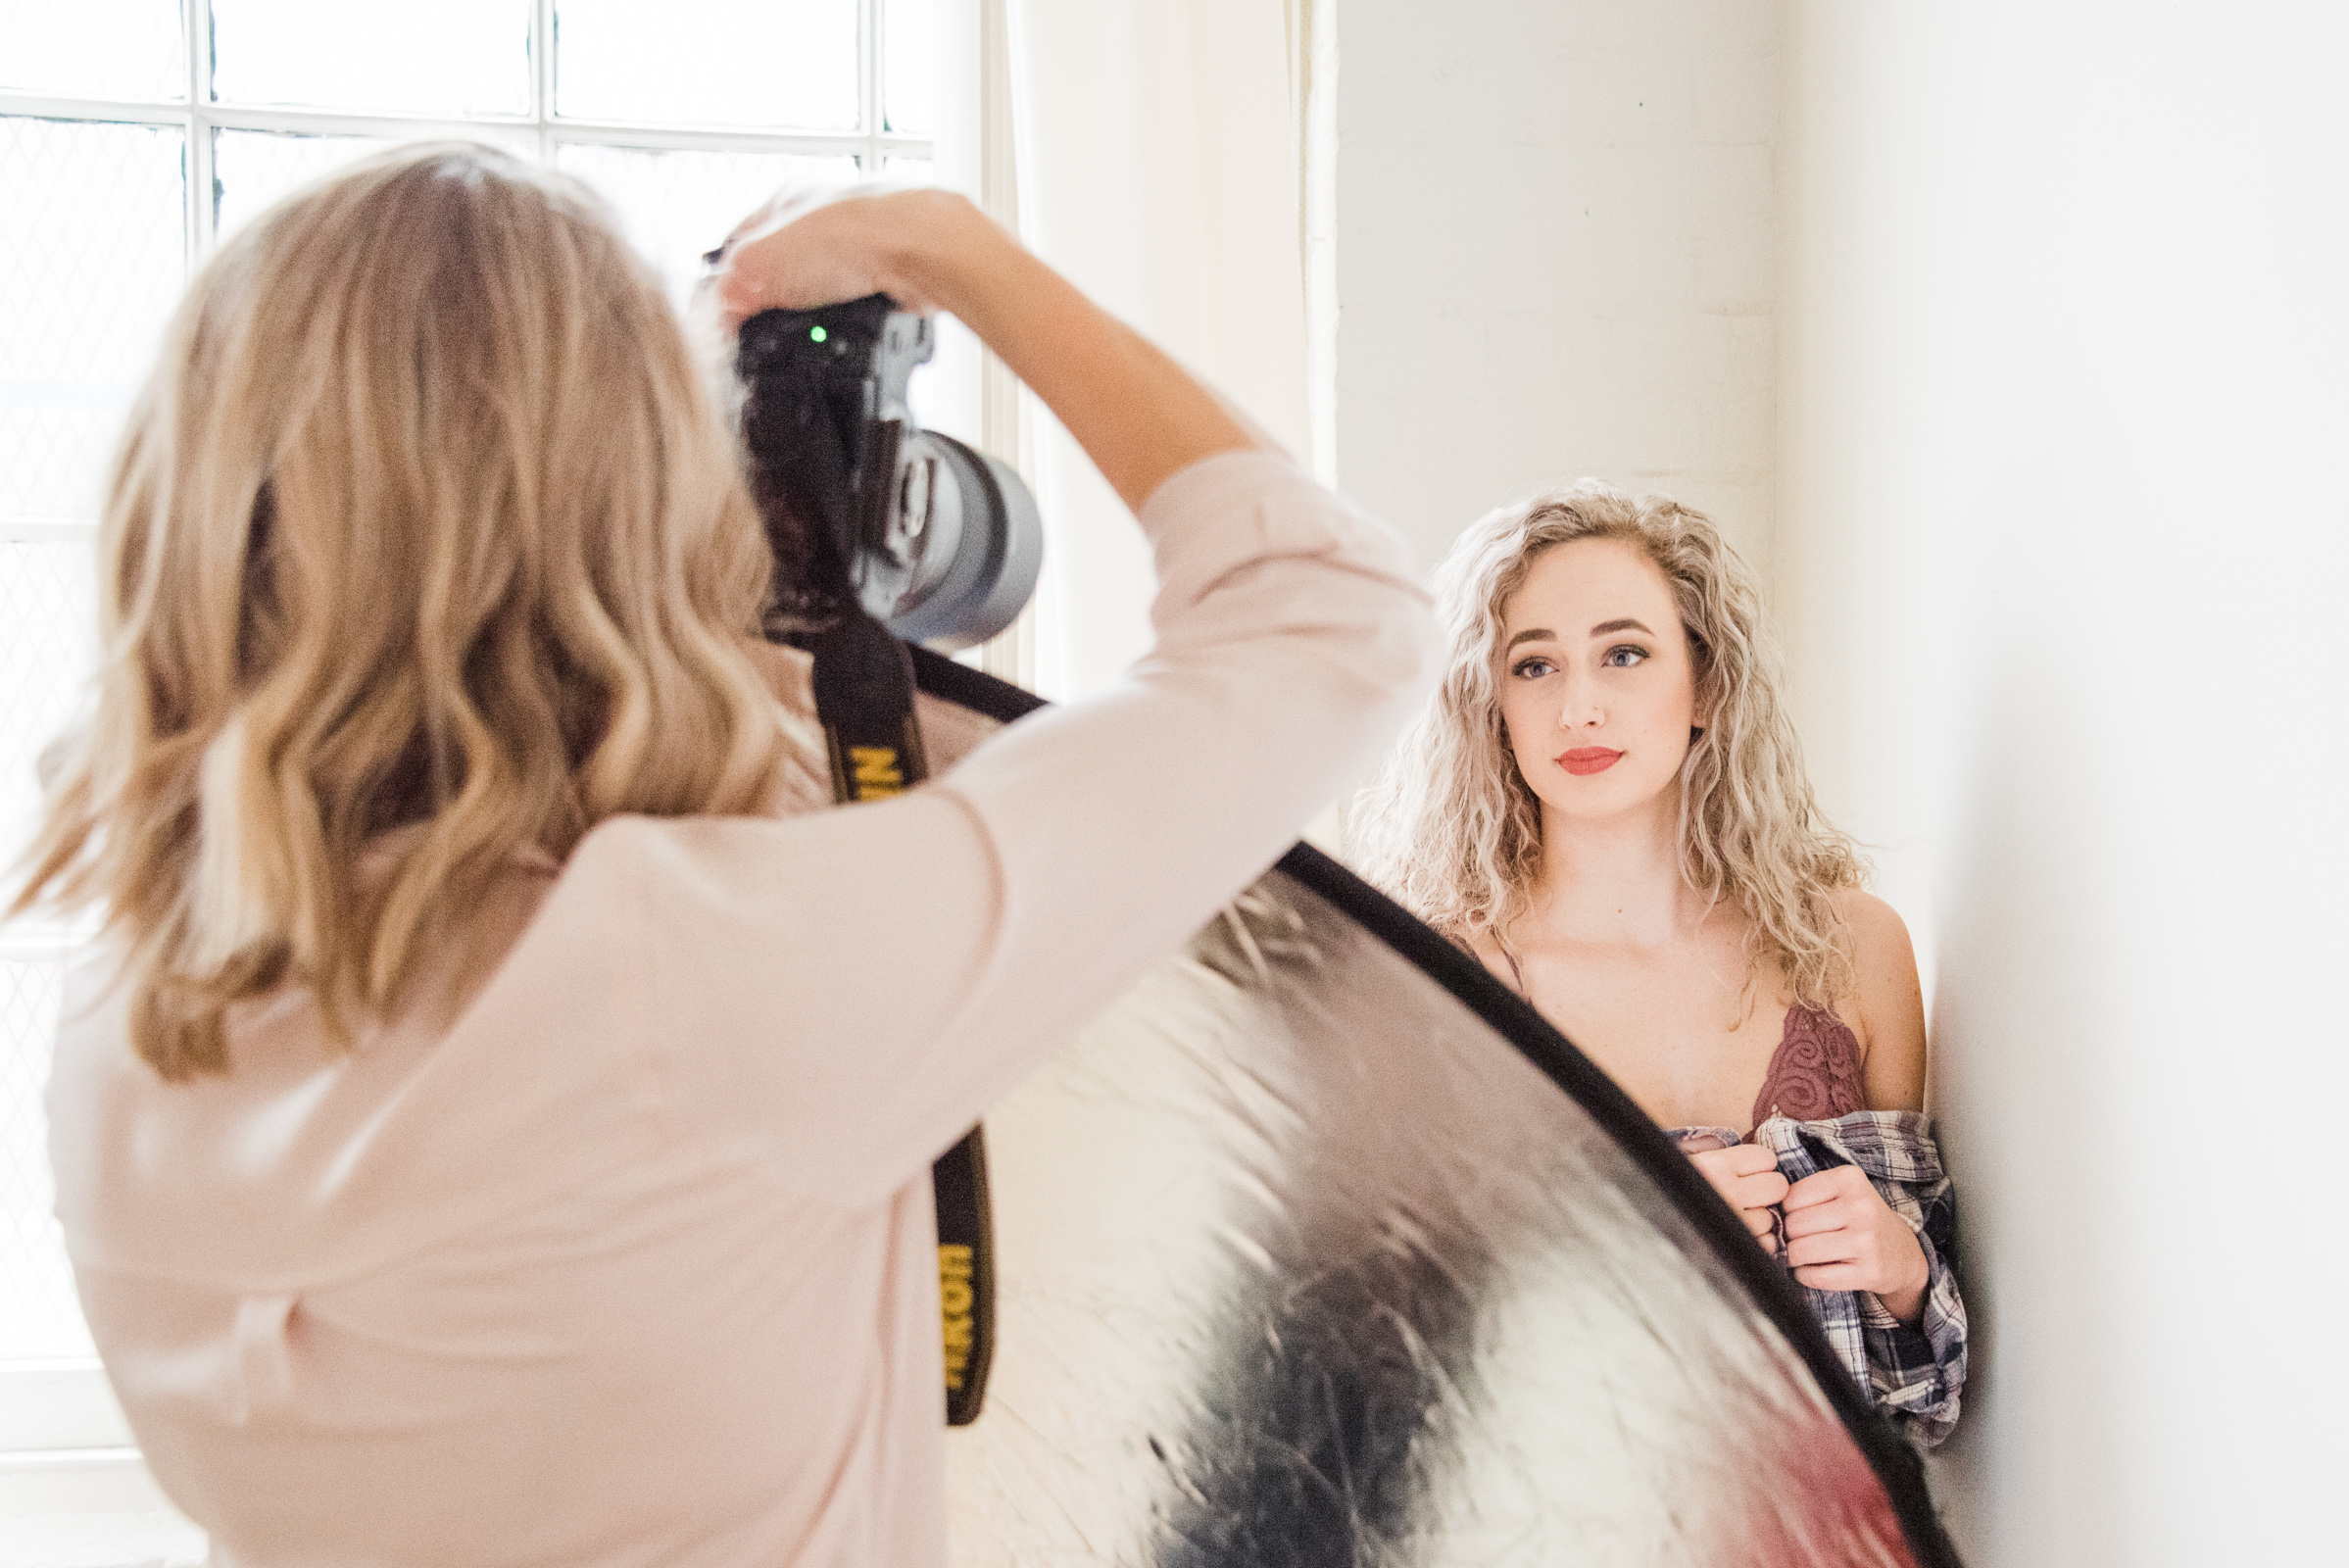 a boudoir photographer photographs her client, photographed as part of a behind the scenes brand shoot by jamie bannon photography.